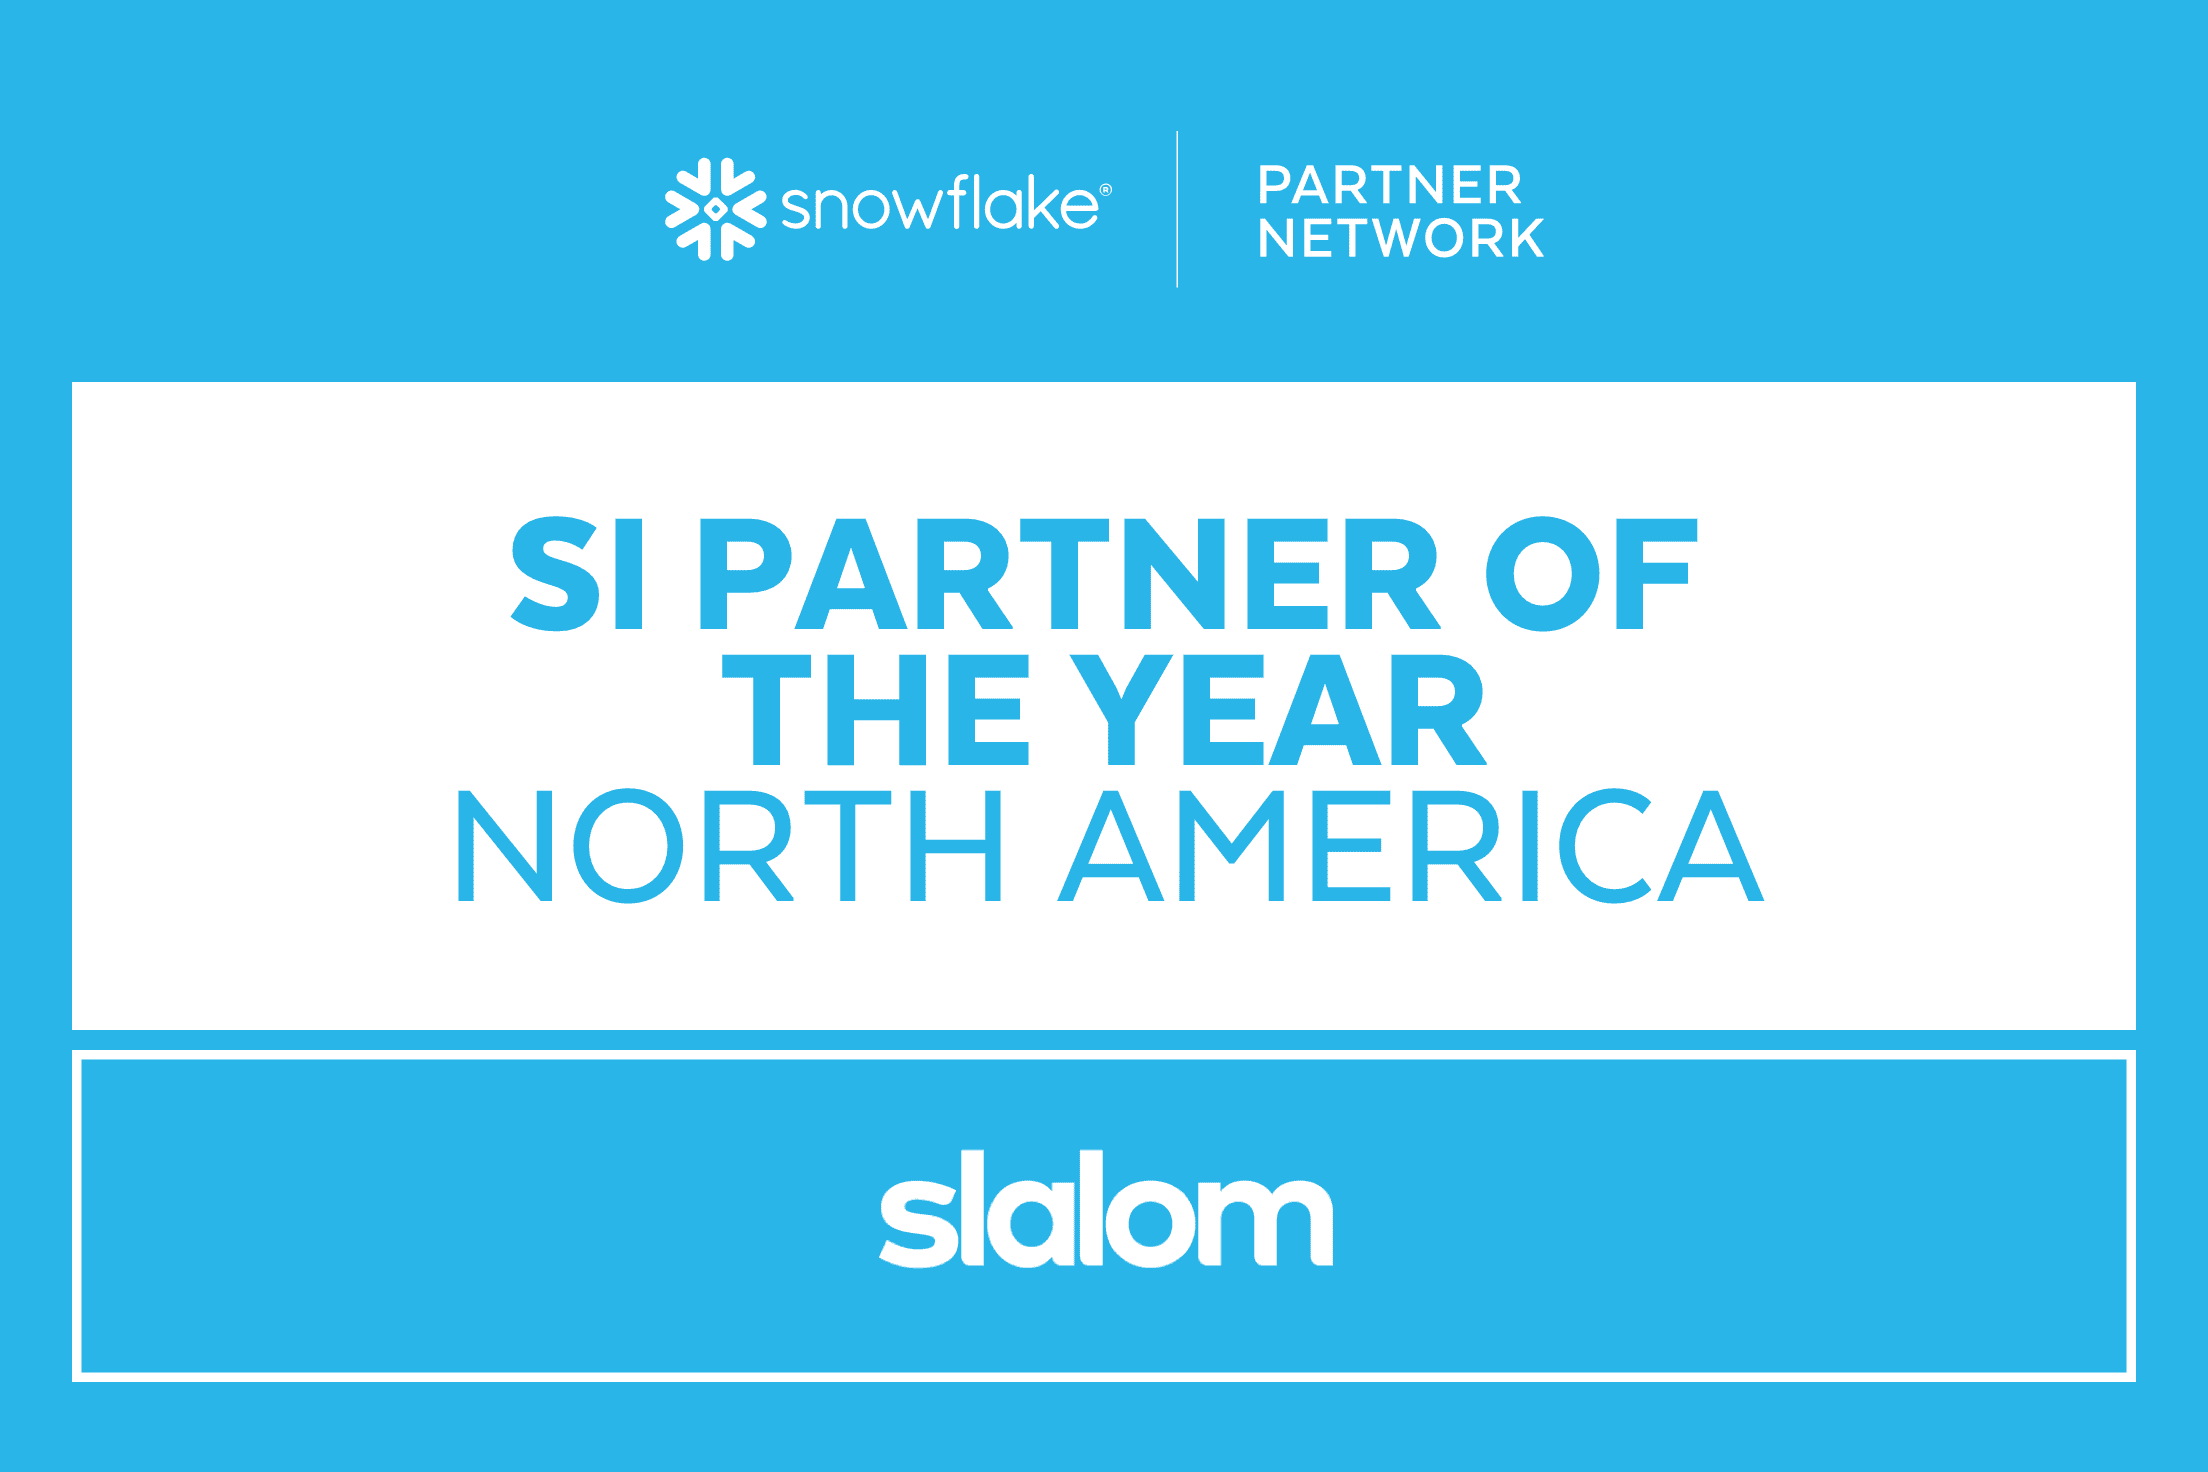 Snowflake Partner Network SI Partner of the Year North America art.